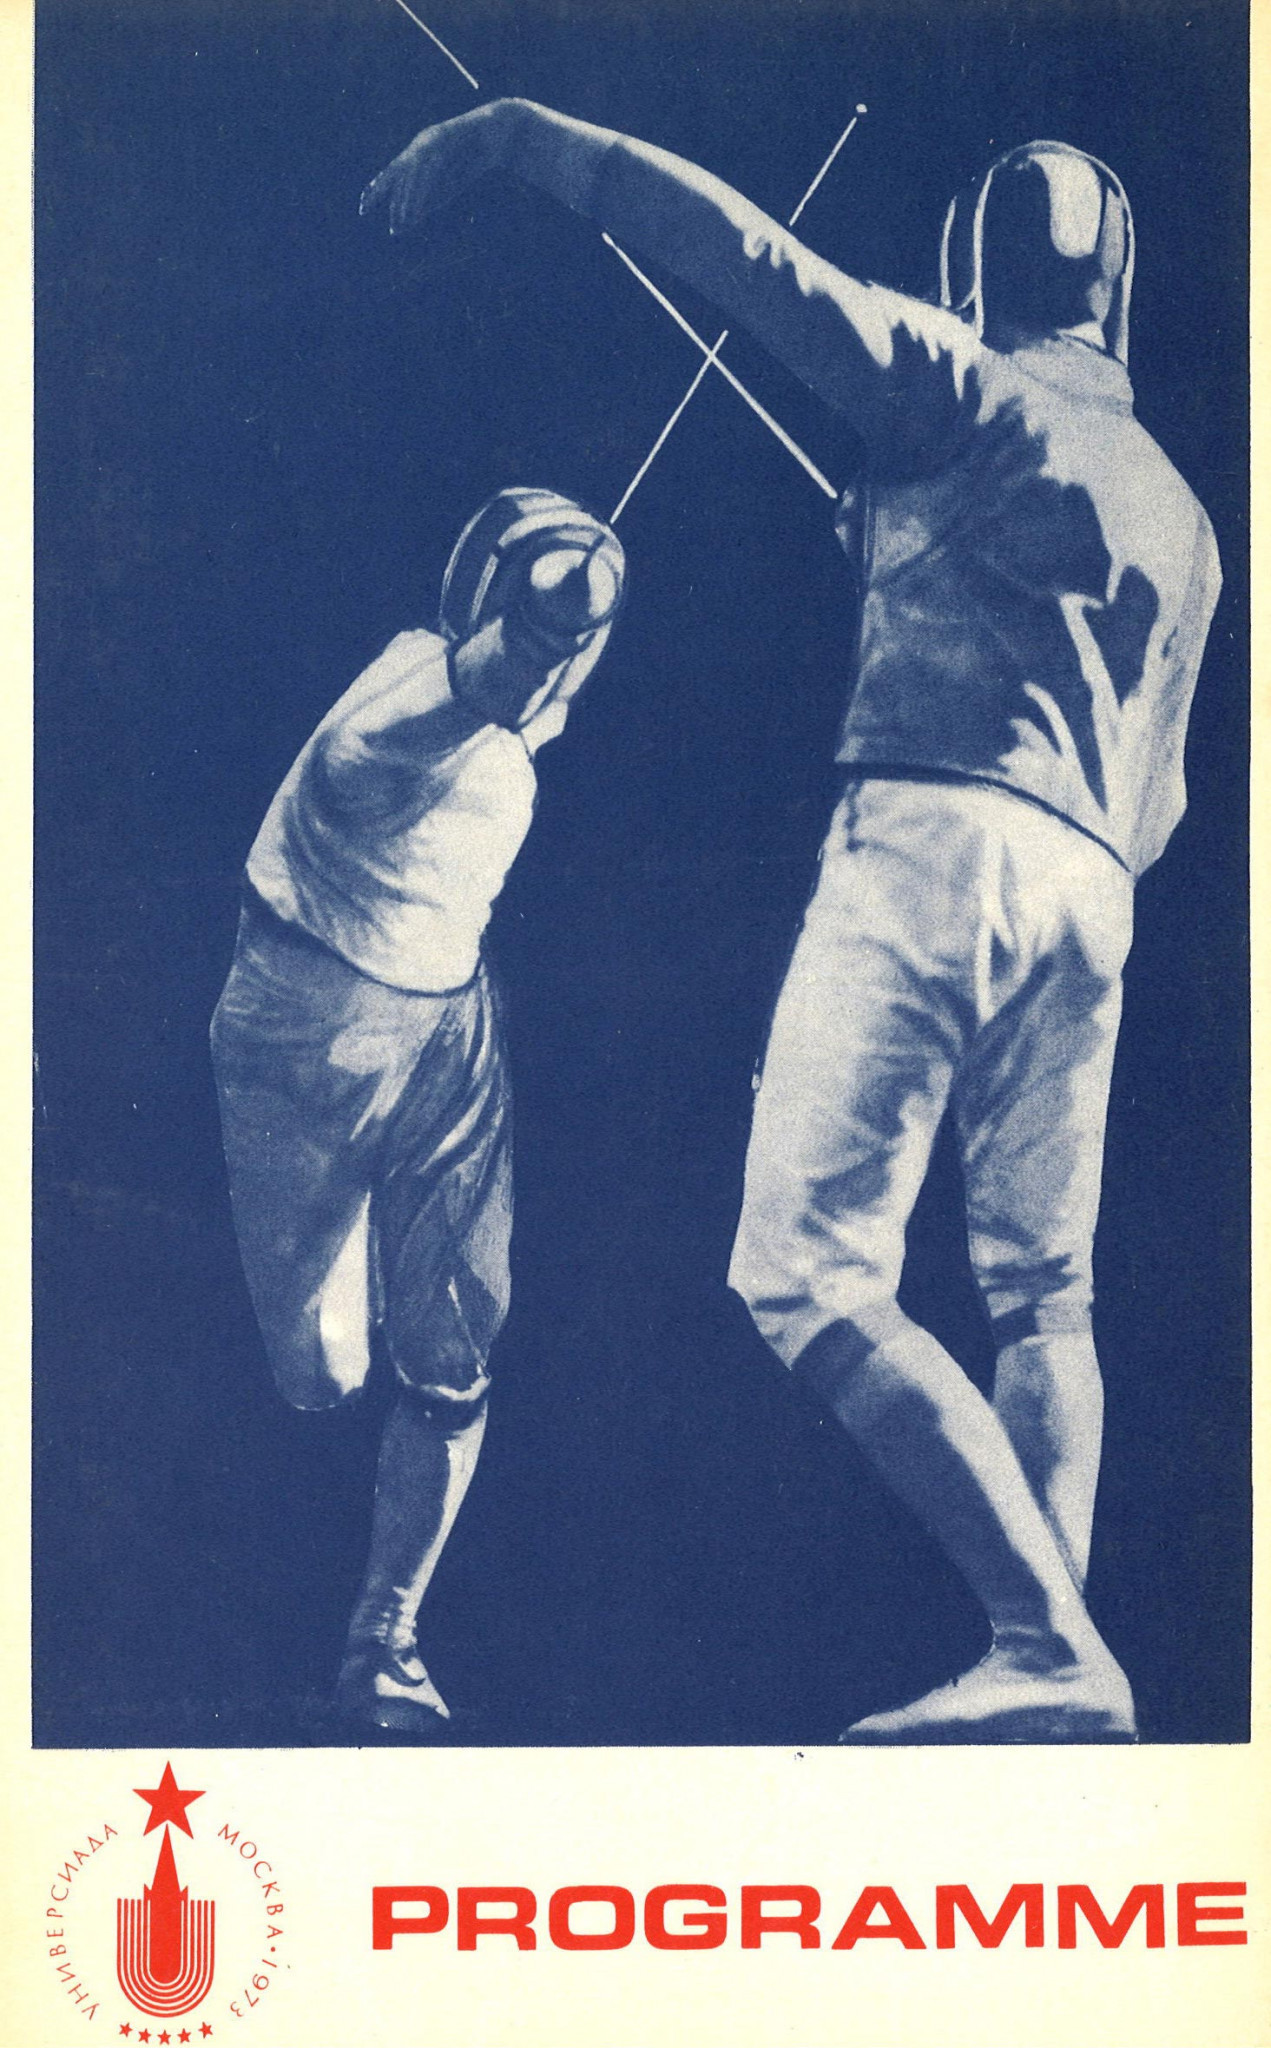 The programme for fencing at the 1973 Moscow Universiade which included a 19-year-old German fencer called Thomas Bach ©FISU